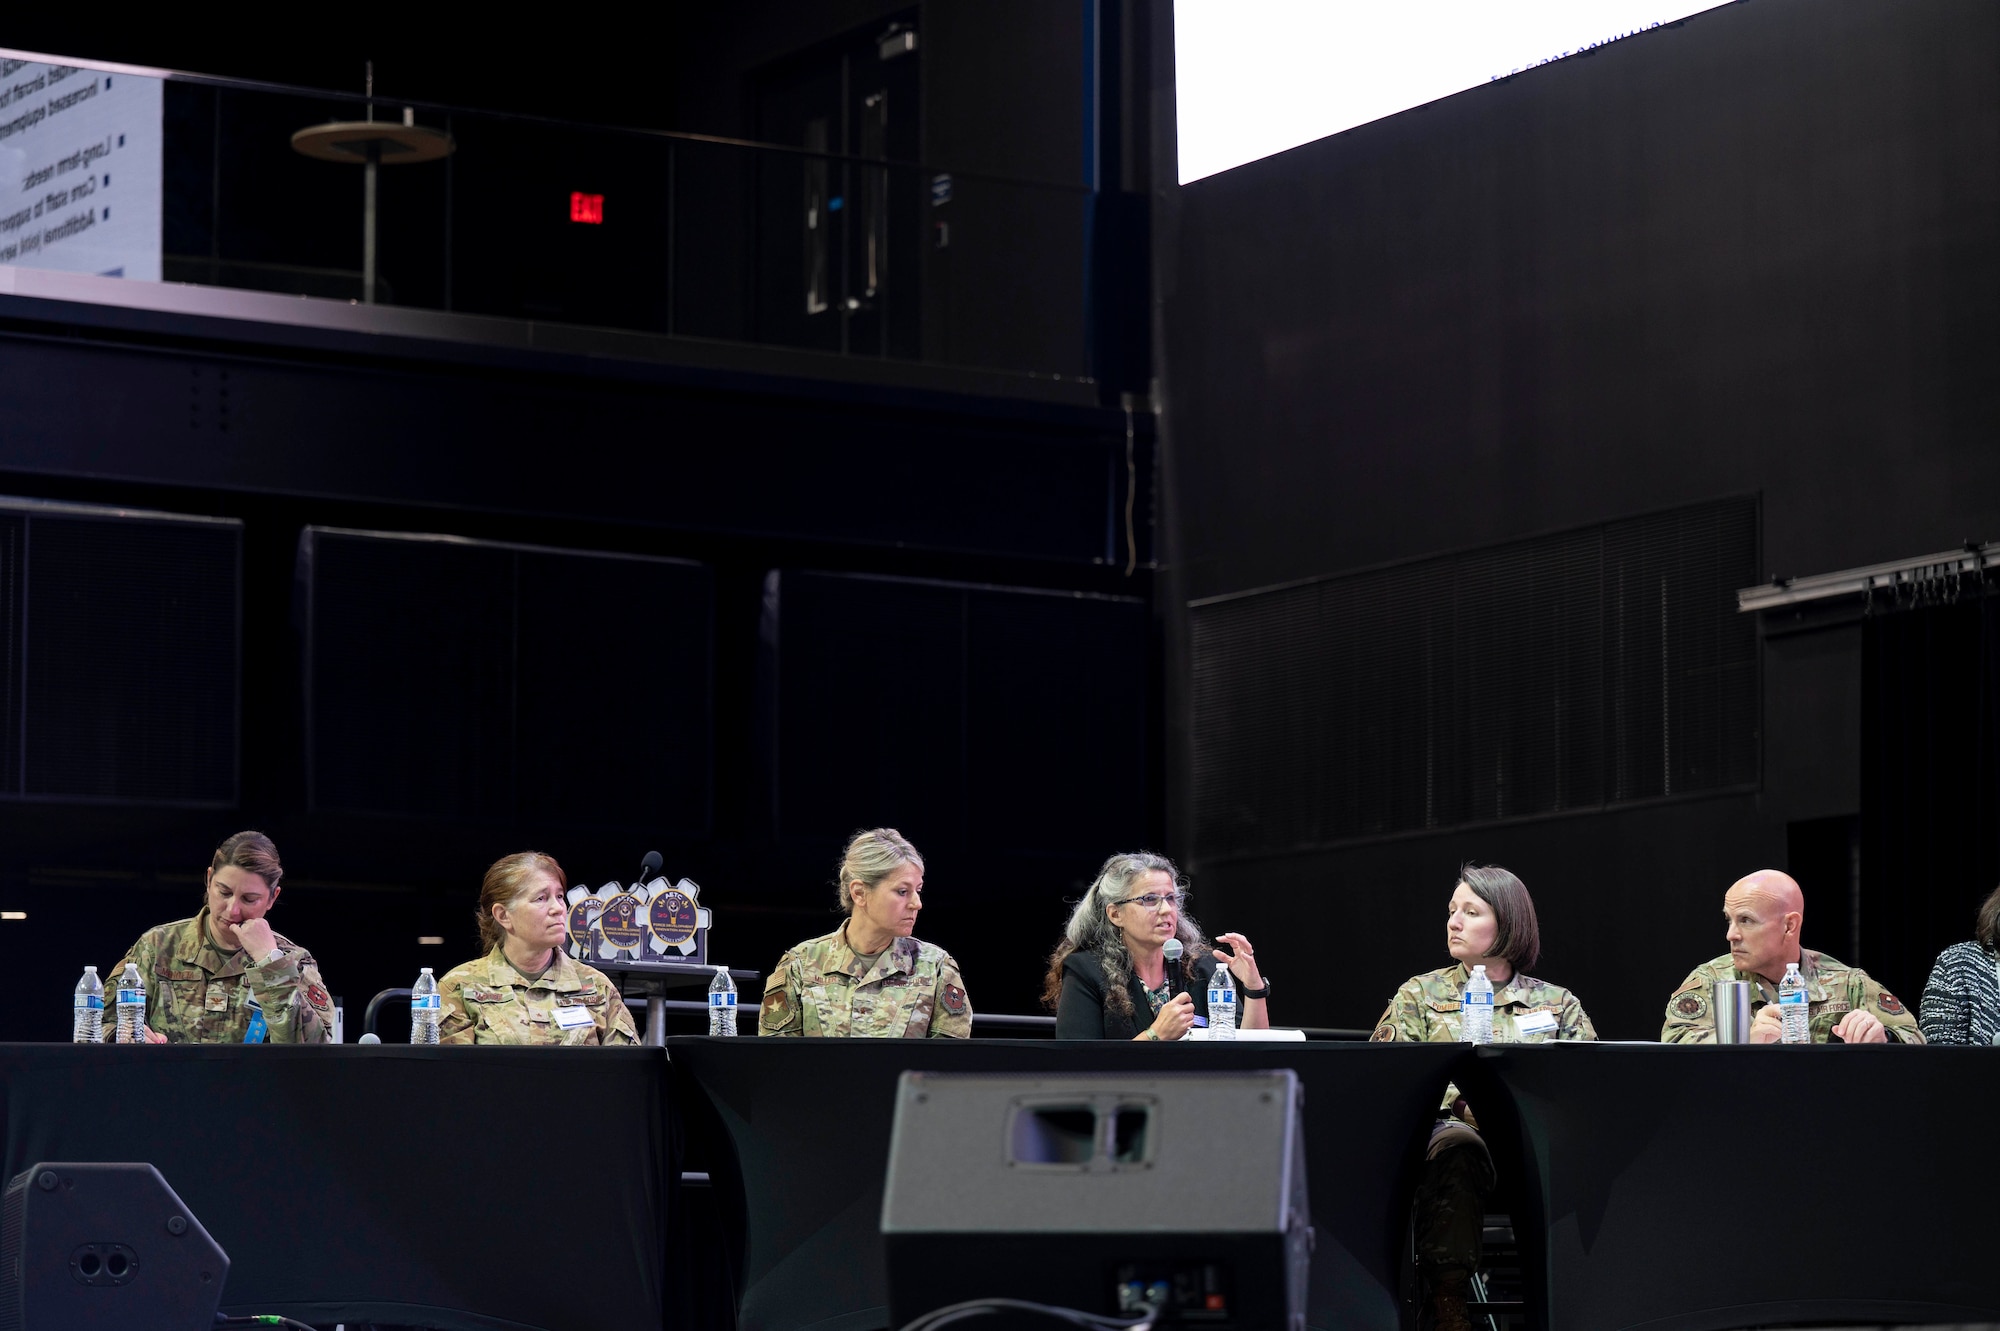 A panel of judges ask questions to submitters as they pitch their innovation ideas live during the iChallenge competition portion of Innovation Day at FORCECON 2022